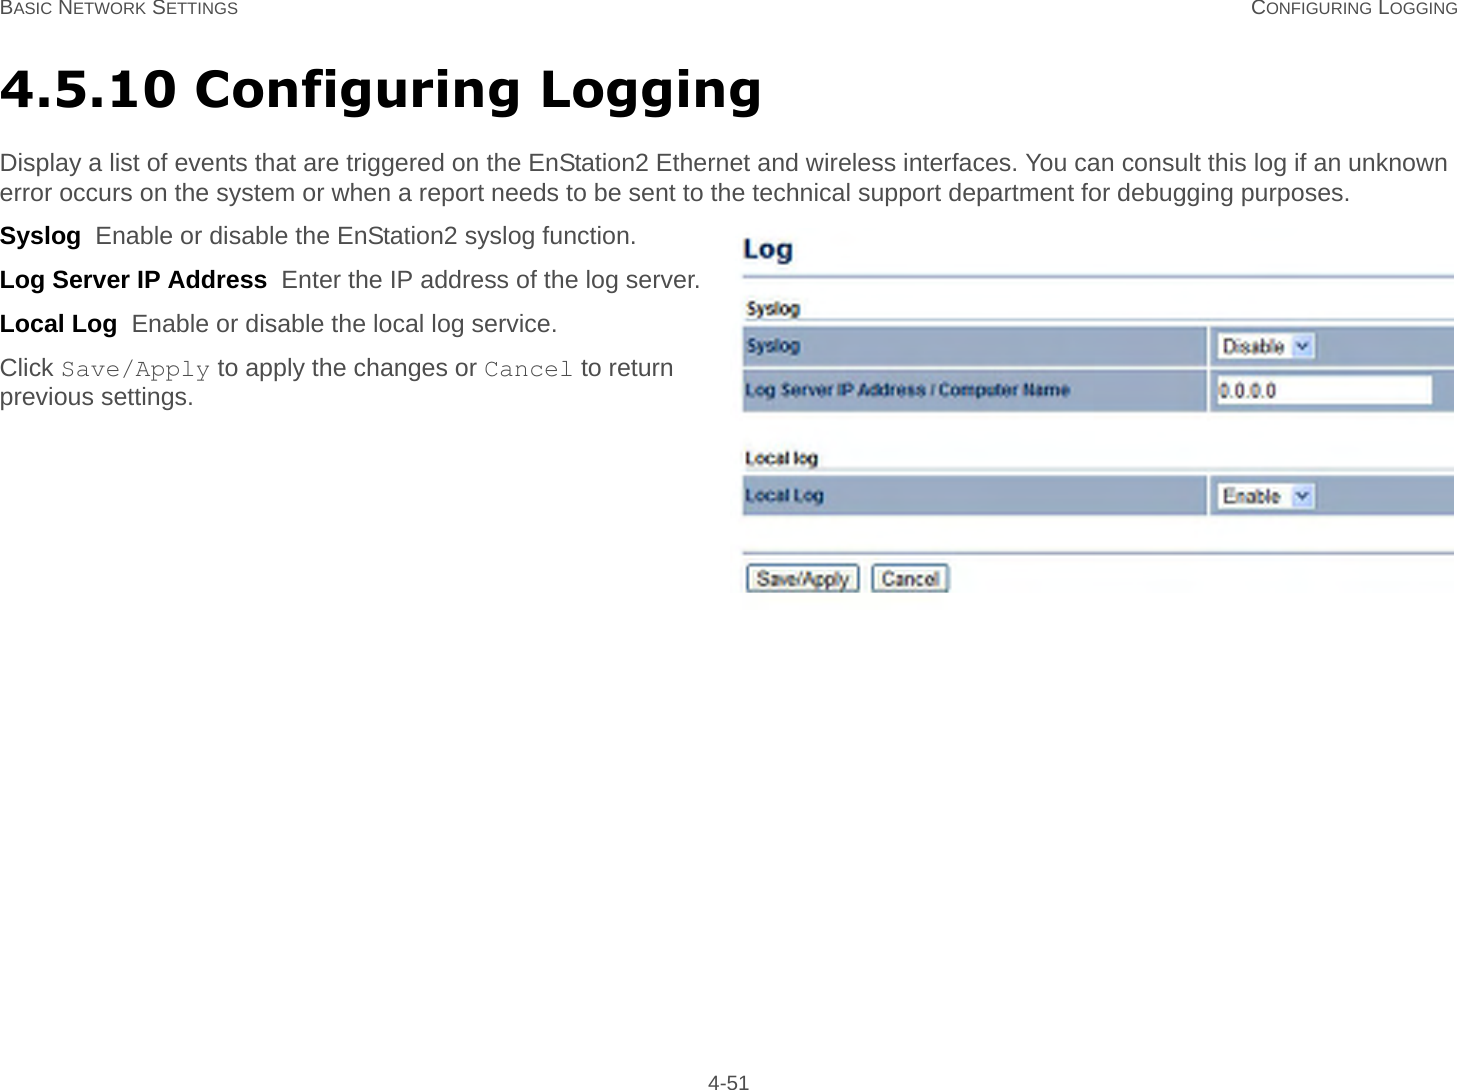 BASIC NETWORK SETTINGS CONFIGURING LOGGING 4-514.5.10 Configuring LoggingDisplay a list of events that are triggered on the EnStation2 Ethernet and wireless interfaces. You can consult this log if an unknown error occurs on the system or when a report needs to be sent to the technical support department for debugging purposes.Syslog  Enable or disable the EnStation2 syslog function.Log Server IP Address  Enter the IP address of the log server.Local Log  Enable or disable the local log service.Click Save/Apply to apply the changes or Cancel to return previous settings.